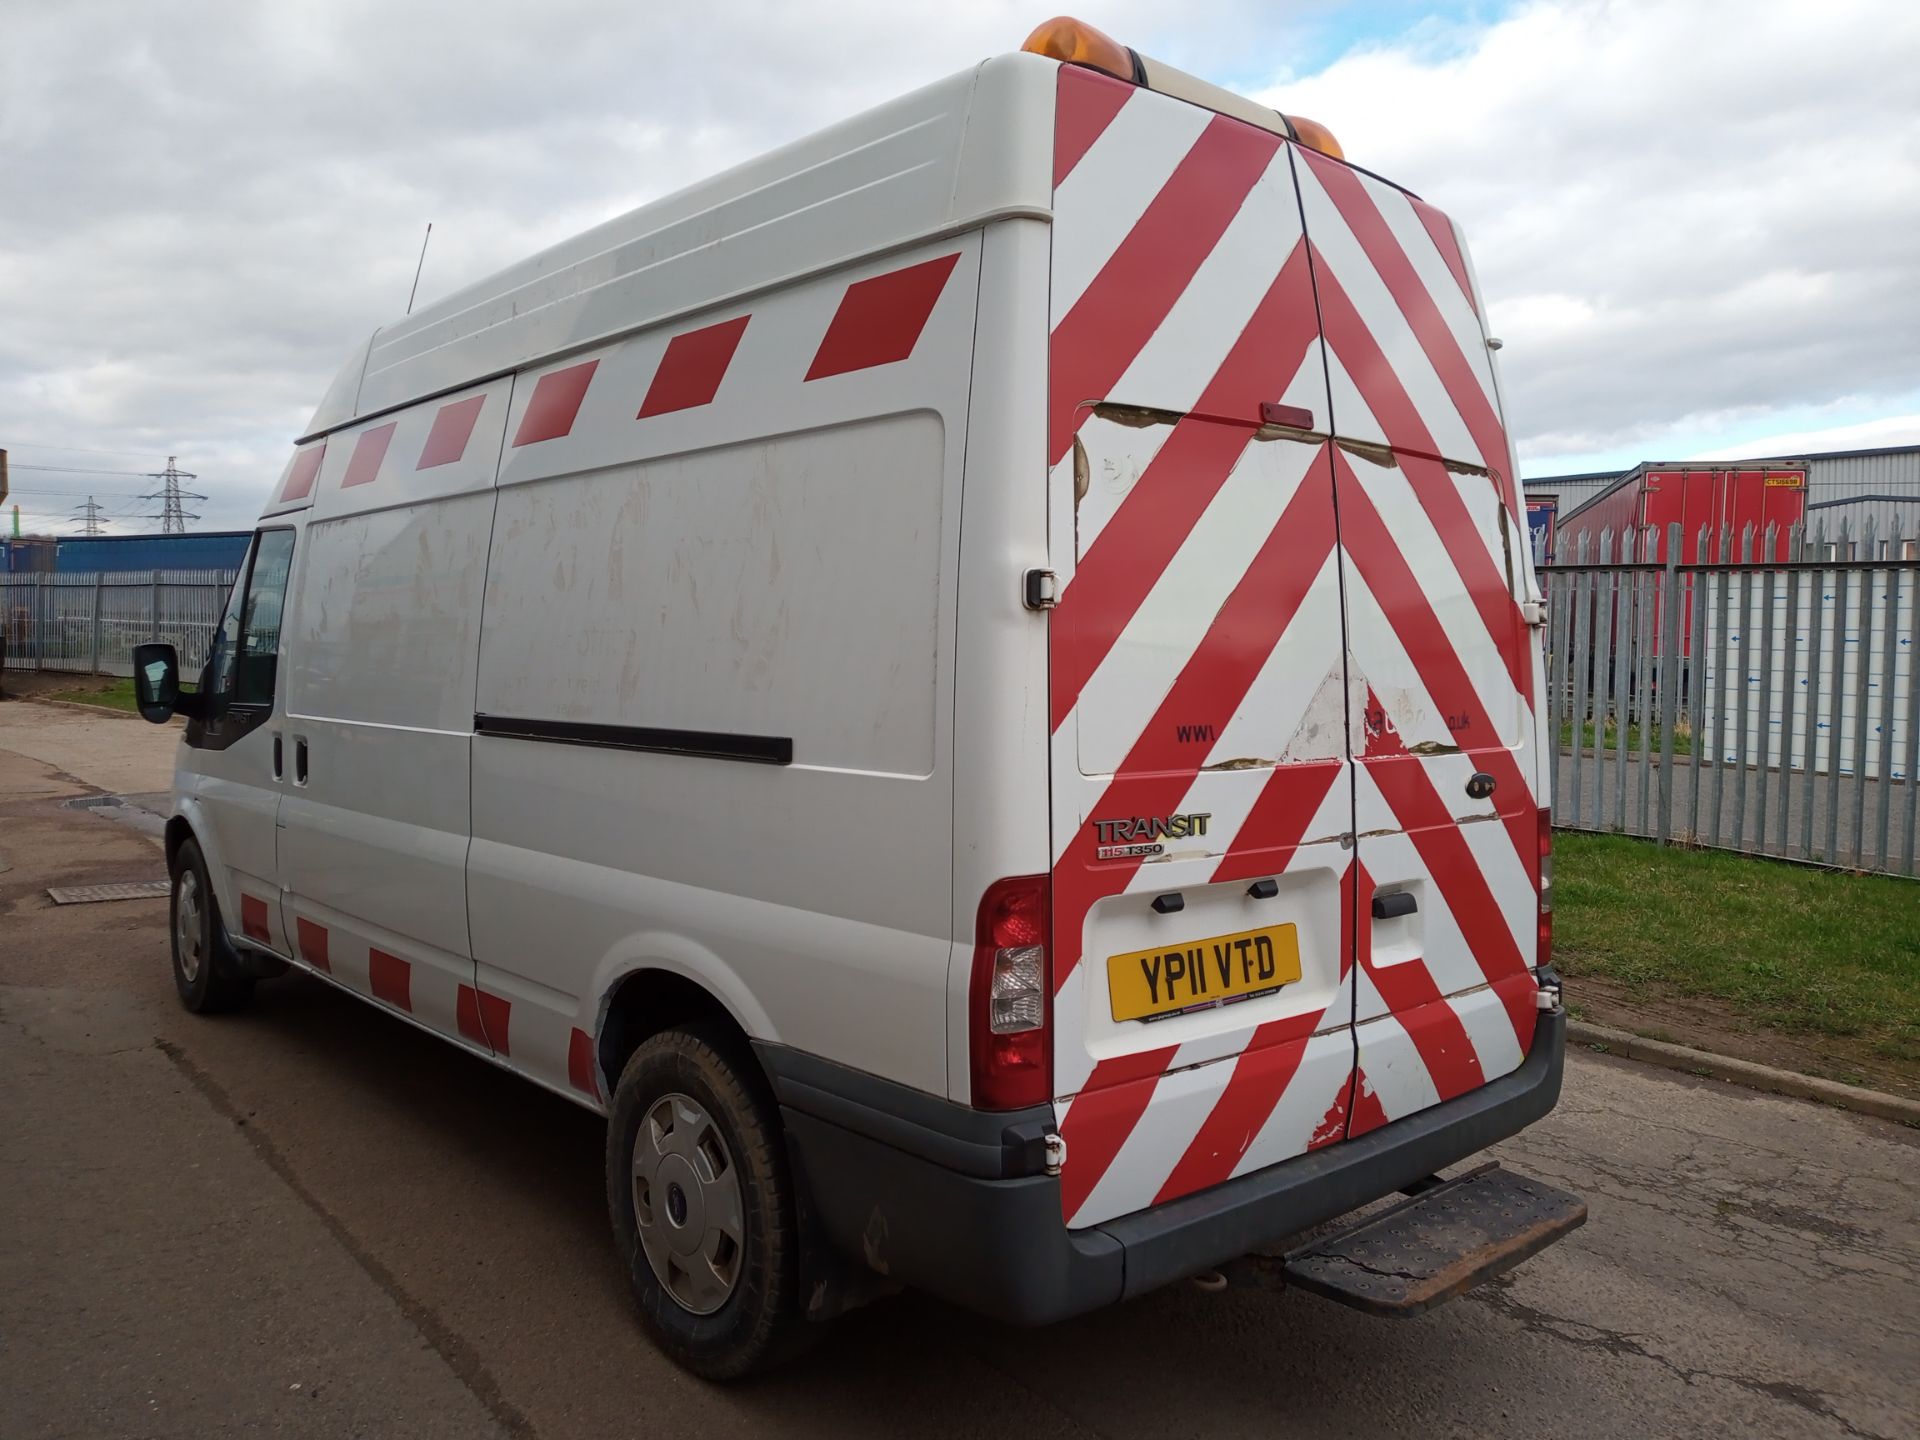 2011 Ford Transit 115 T350i RWD LWB Medium Roof - CL505 - Location: Corby, Northamptonshire140,182 - Image 7 of 16